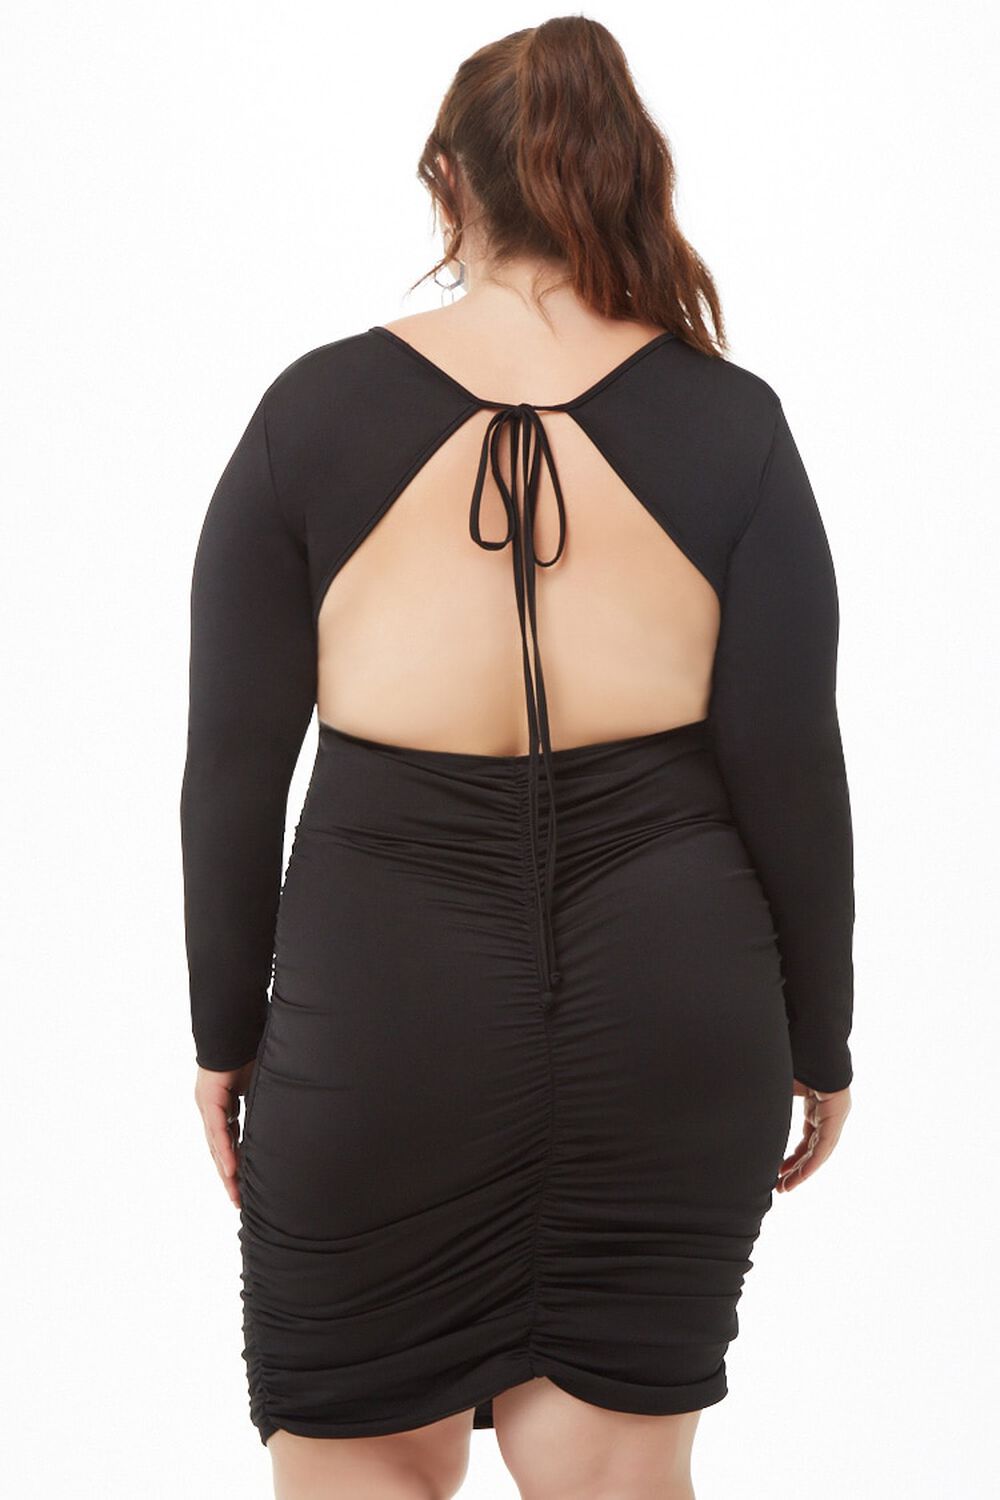 Plus Size Open-Back Ruched Dress, image 3